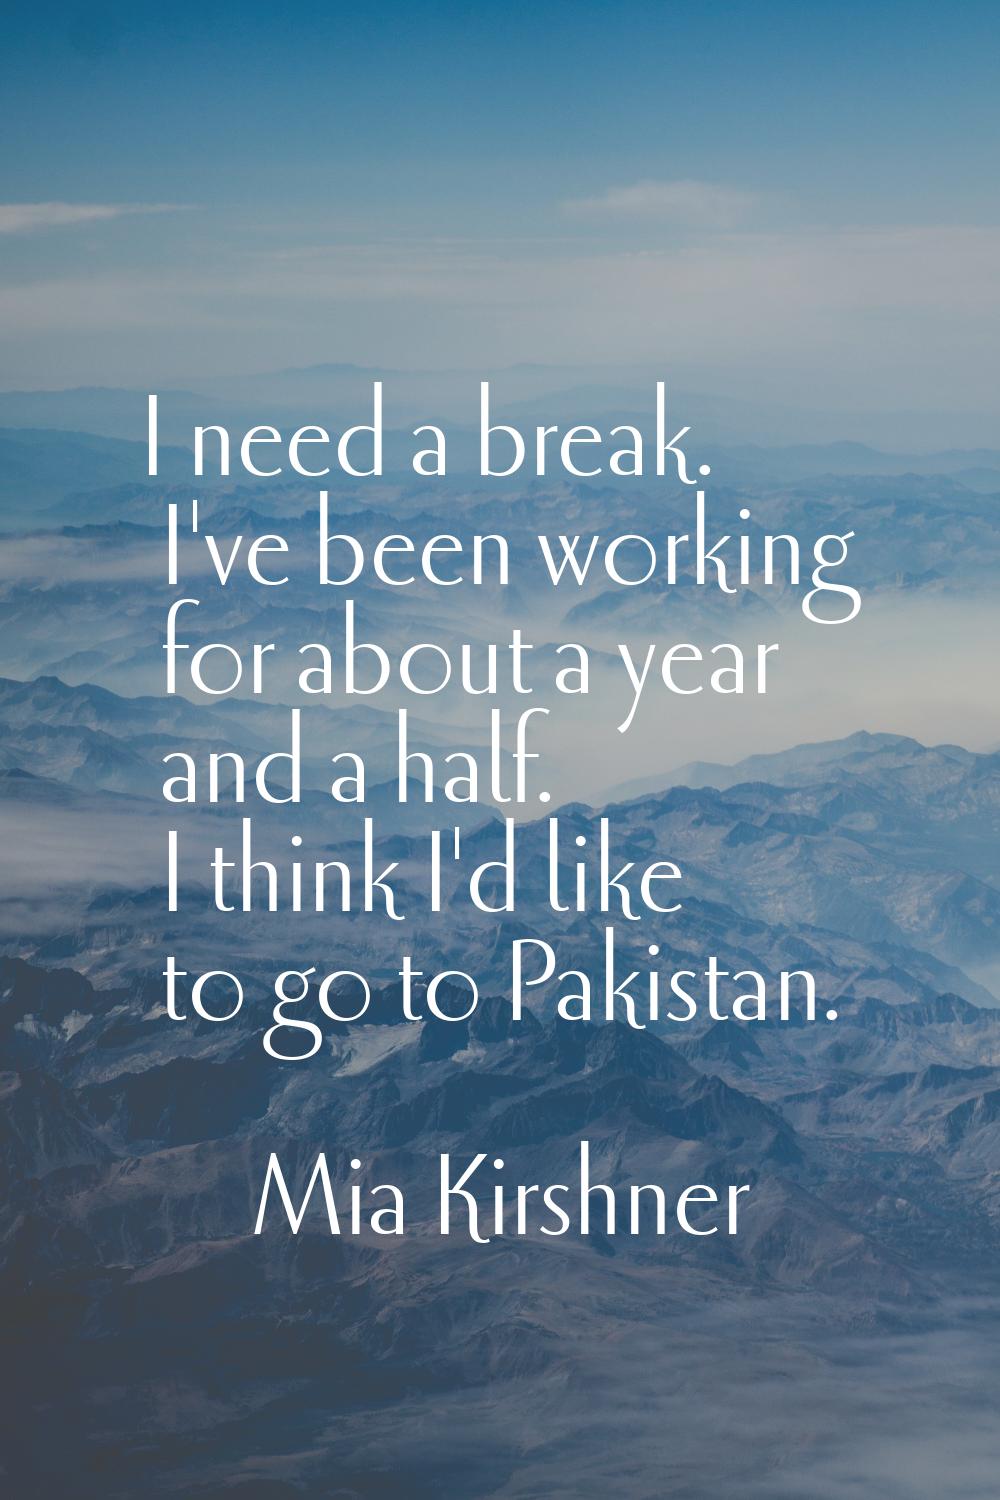 I need a break. I've been working for about a year and a half. I think I'd like to go to Pakistan.